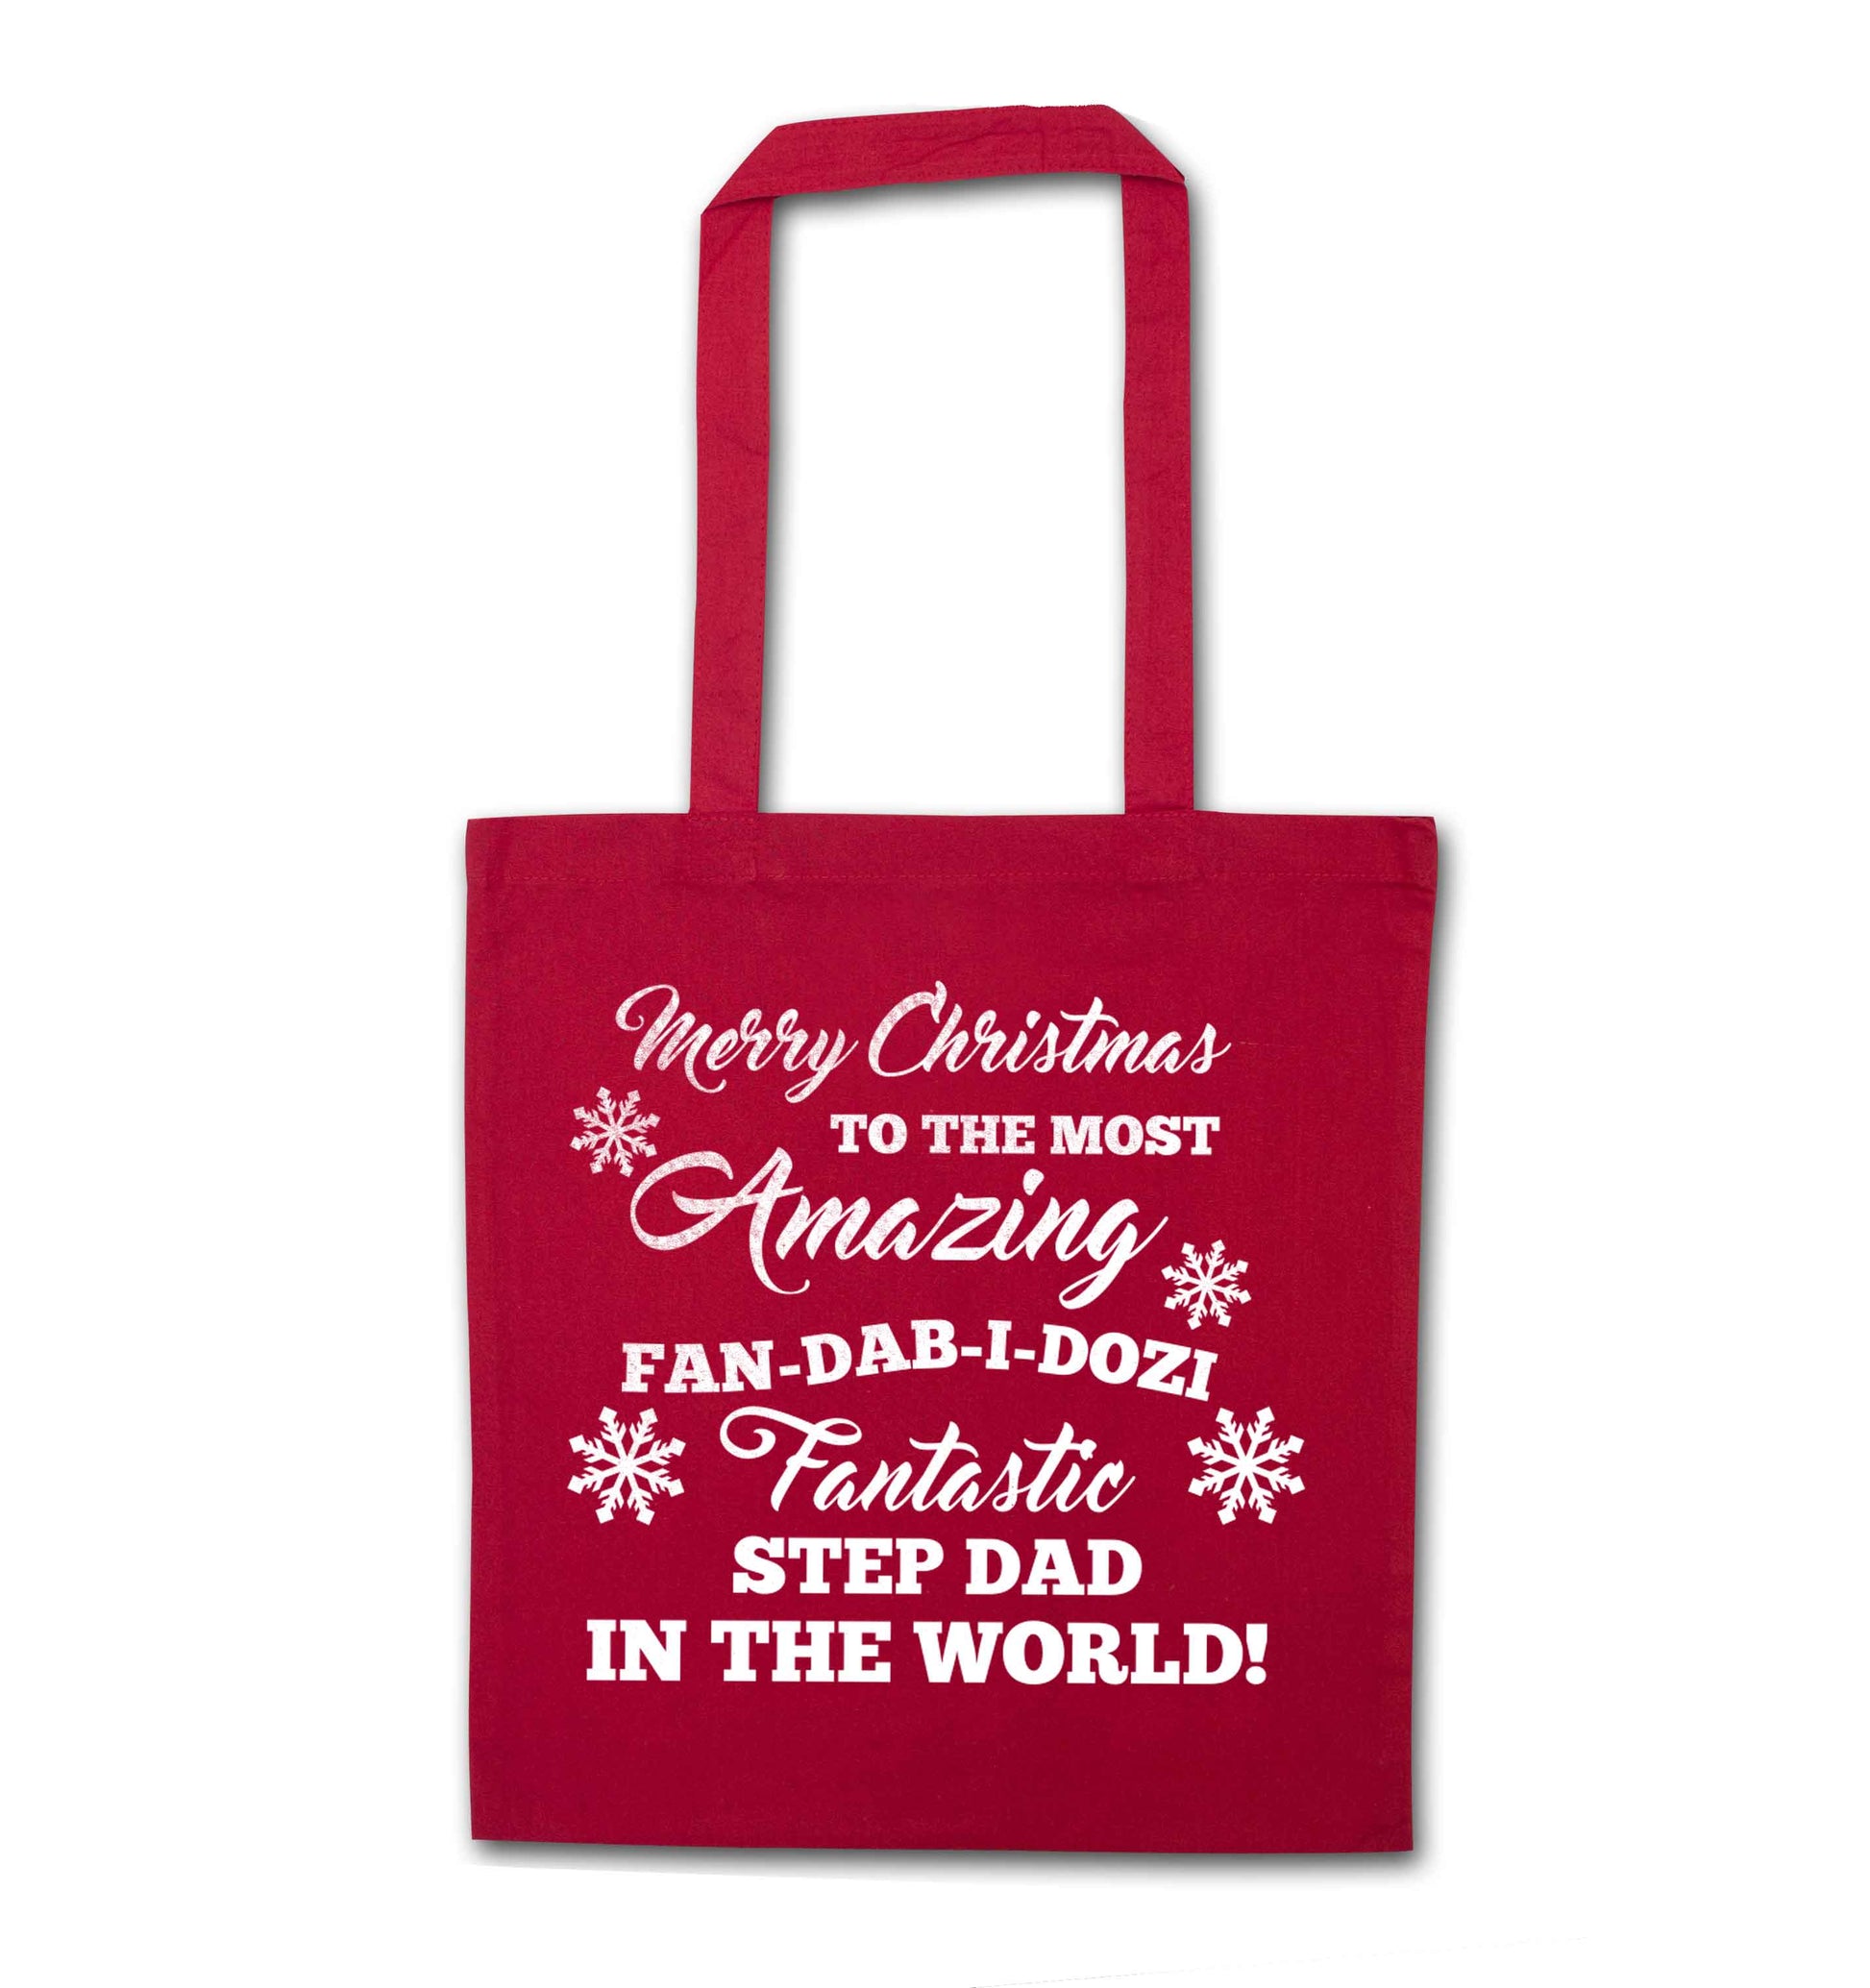 Merry Christmas to the most amazing fan-dab-i-dozi fantasic Step Dad in the world red tote bag